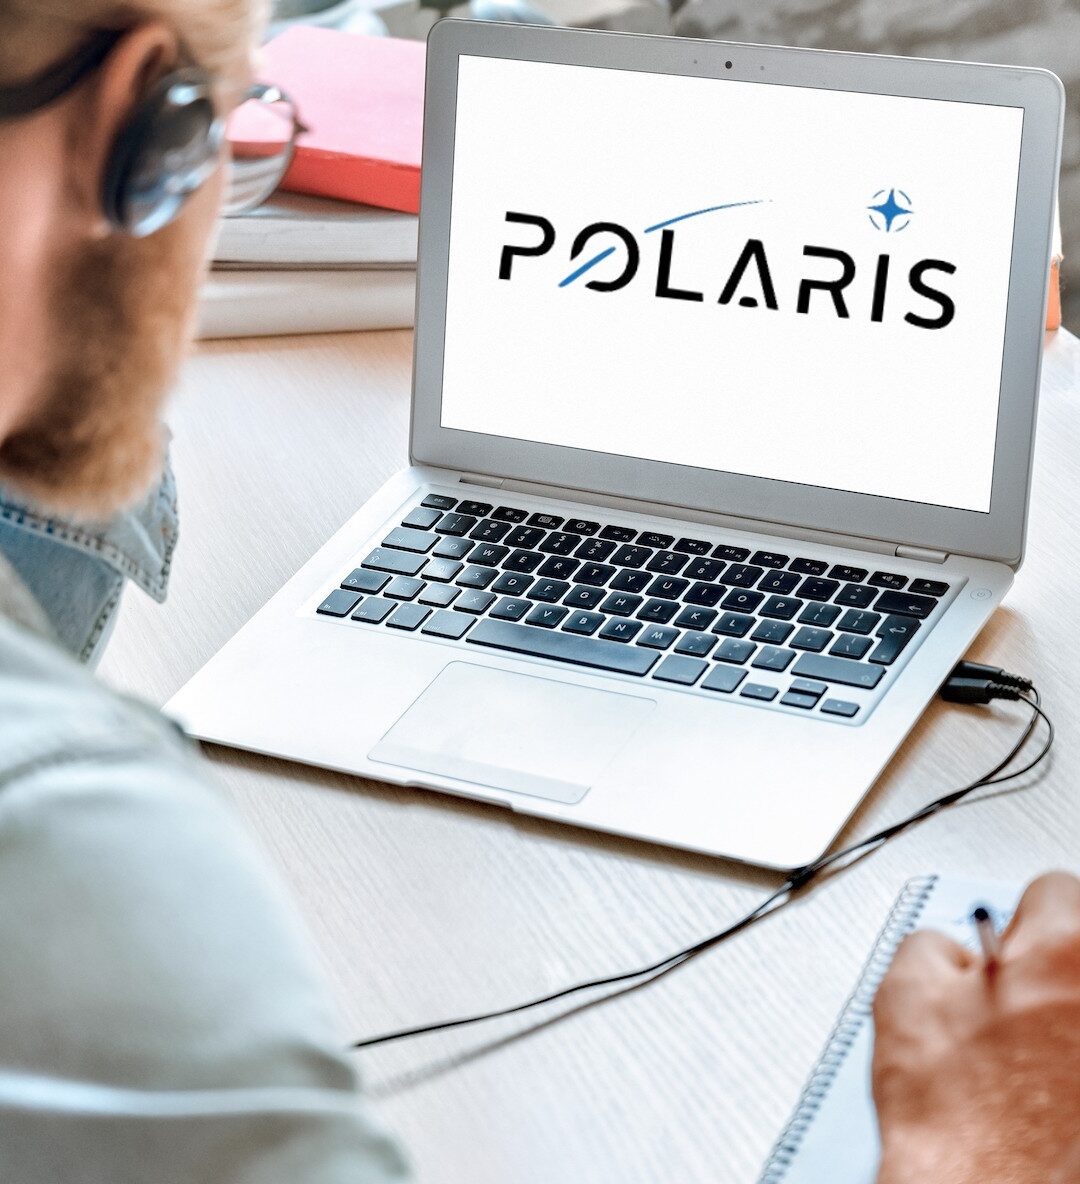 GSA Offers Industry Training on its Polaris Submission Portal Featured Image